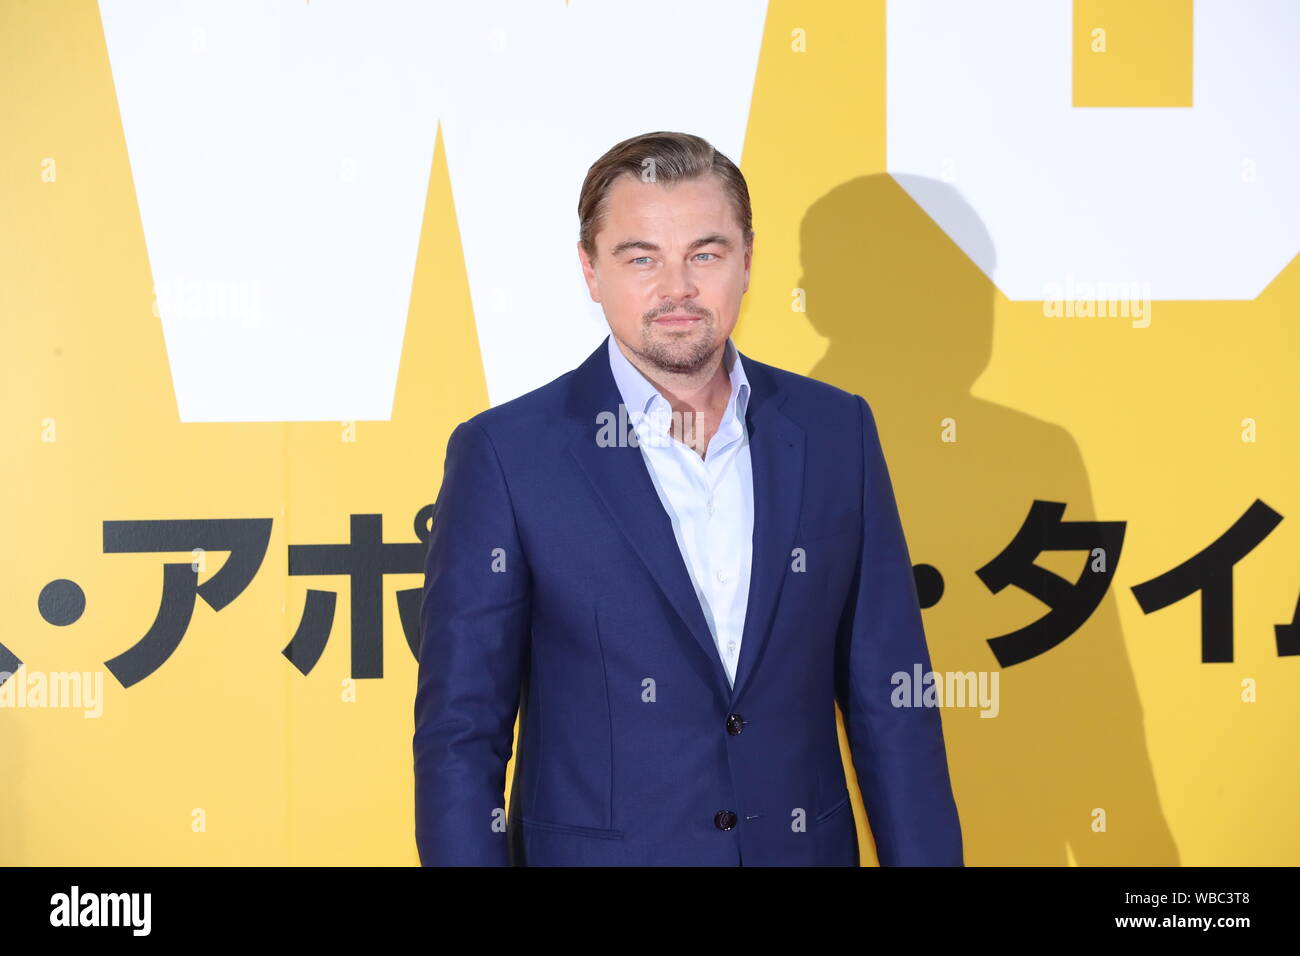 Tokyo, Japan. 26th Aug 2019. Actor Leonardo Dicaprio attends the Japan premiere for their movie 'Once Upon a Time in Hollywood' in Tokyo, Japan on August 26, 2019. The film will be released in Japan on August 30. Credit: Yosuke Tanaka/AFLO/Alamy Live News Stock Photo